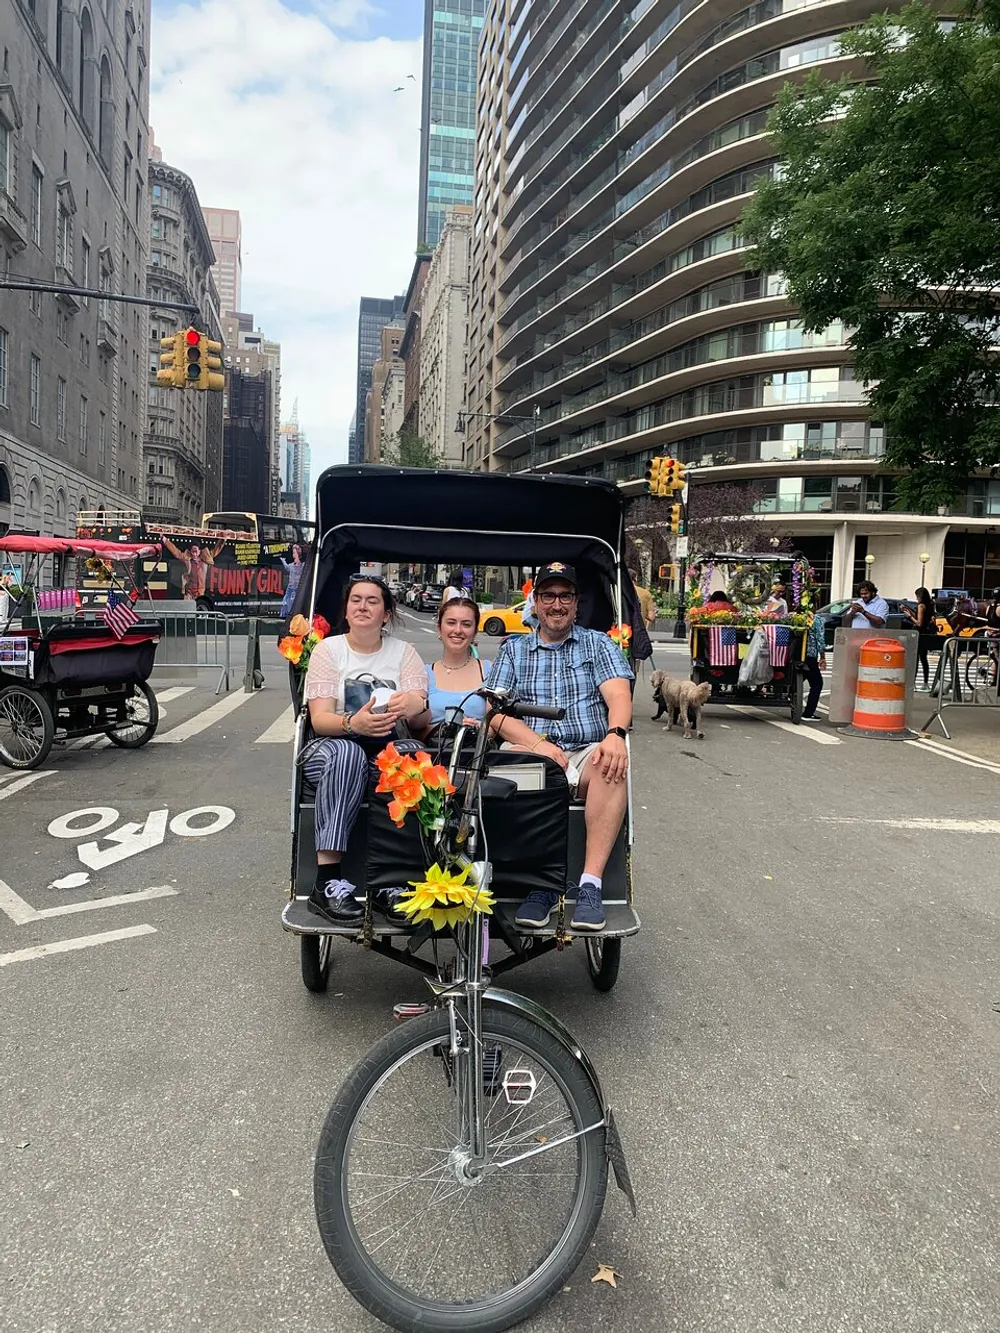 Three people are posing for a photo while seated on a pedicab adorned with flowers on a bustling city street